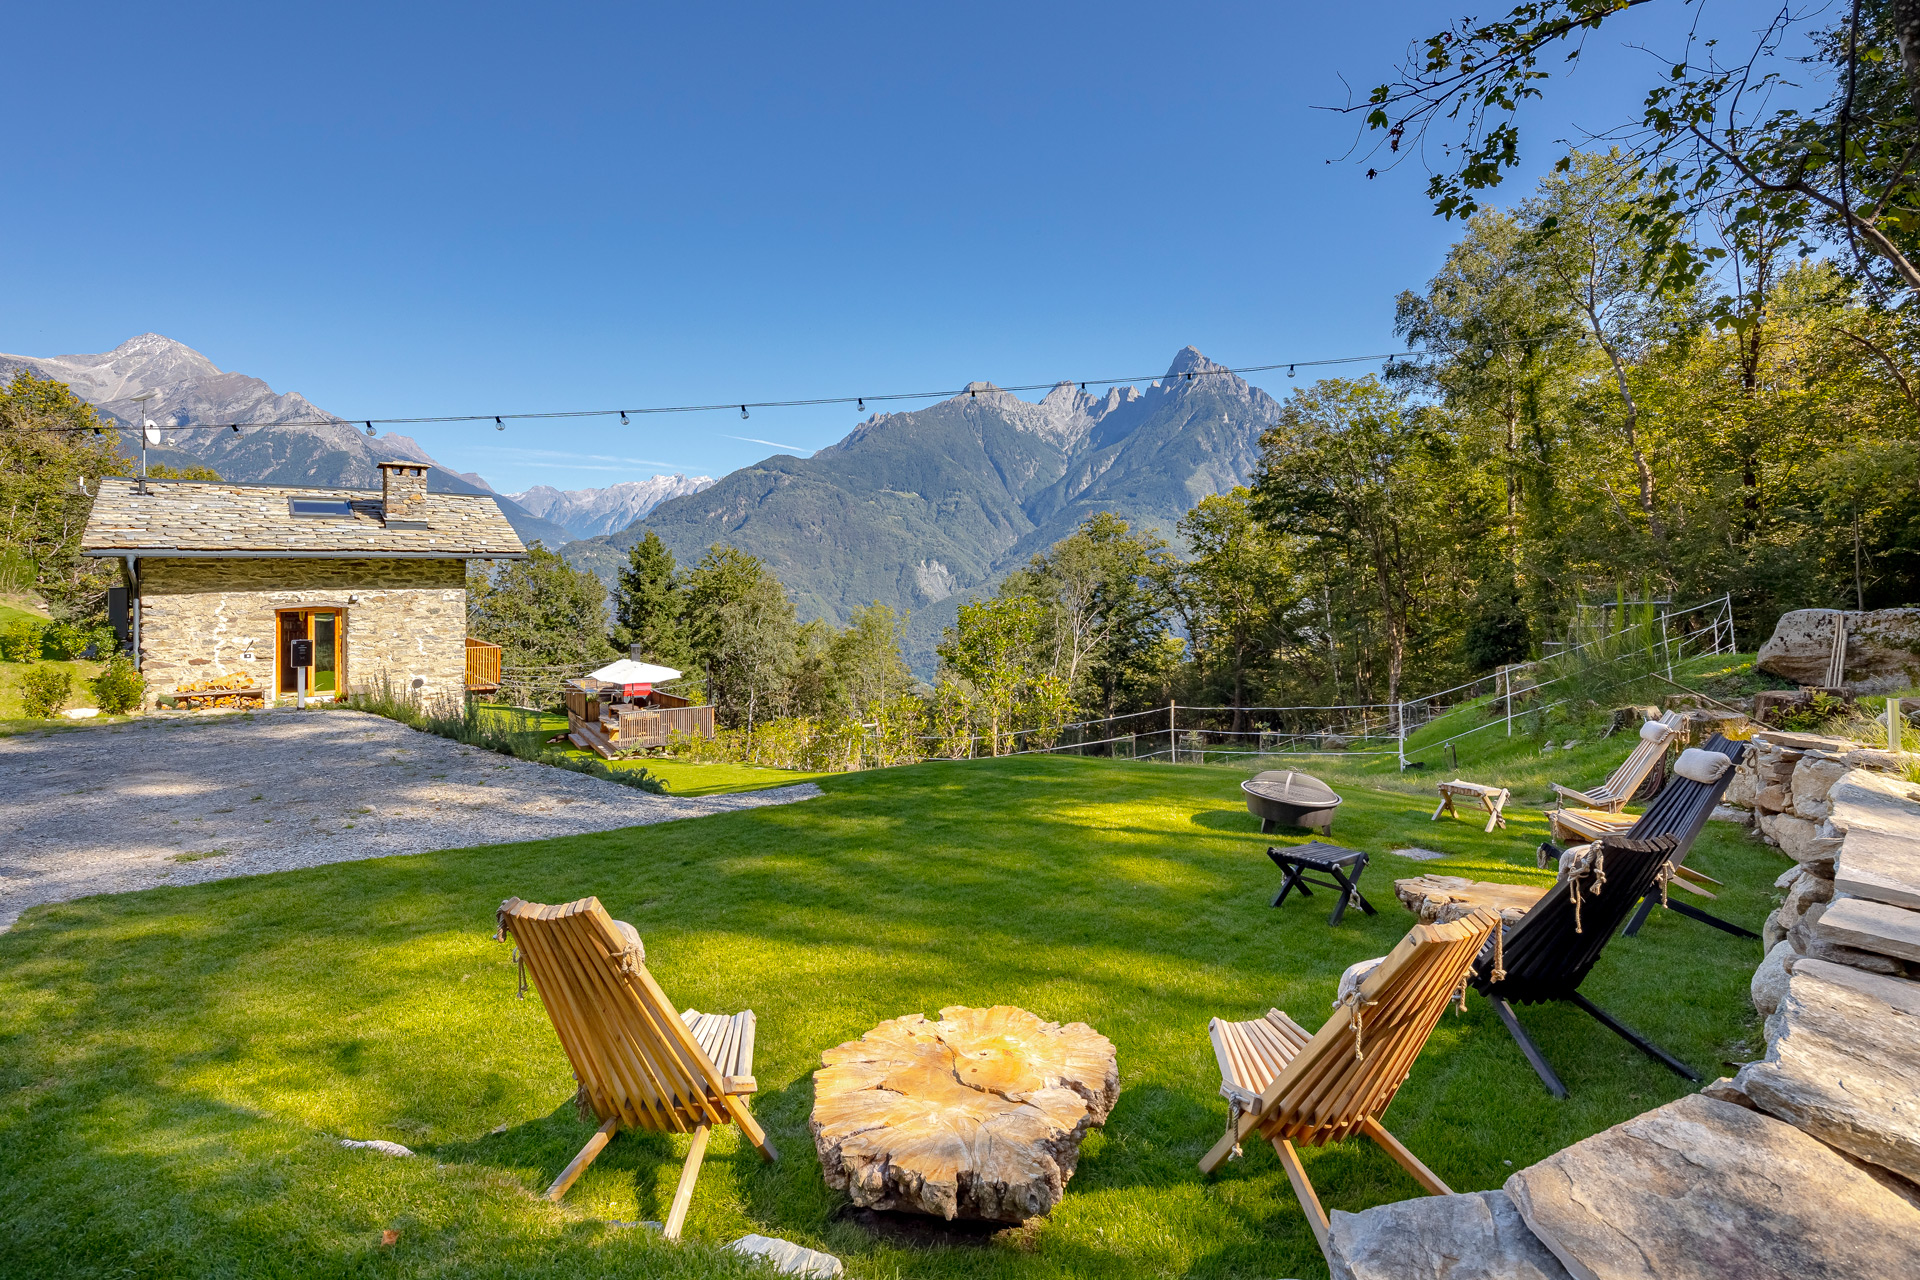 Lawn overlooking the Italian hills, with patio chairs and a stone lodge in the background.